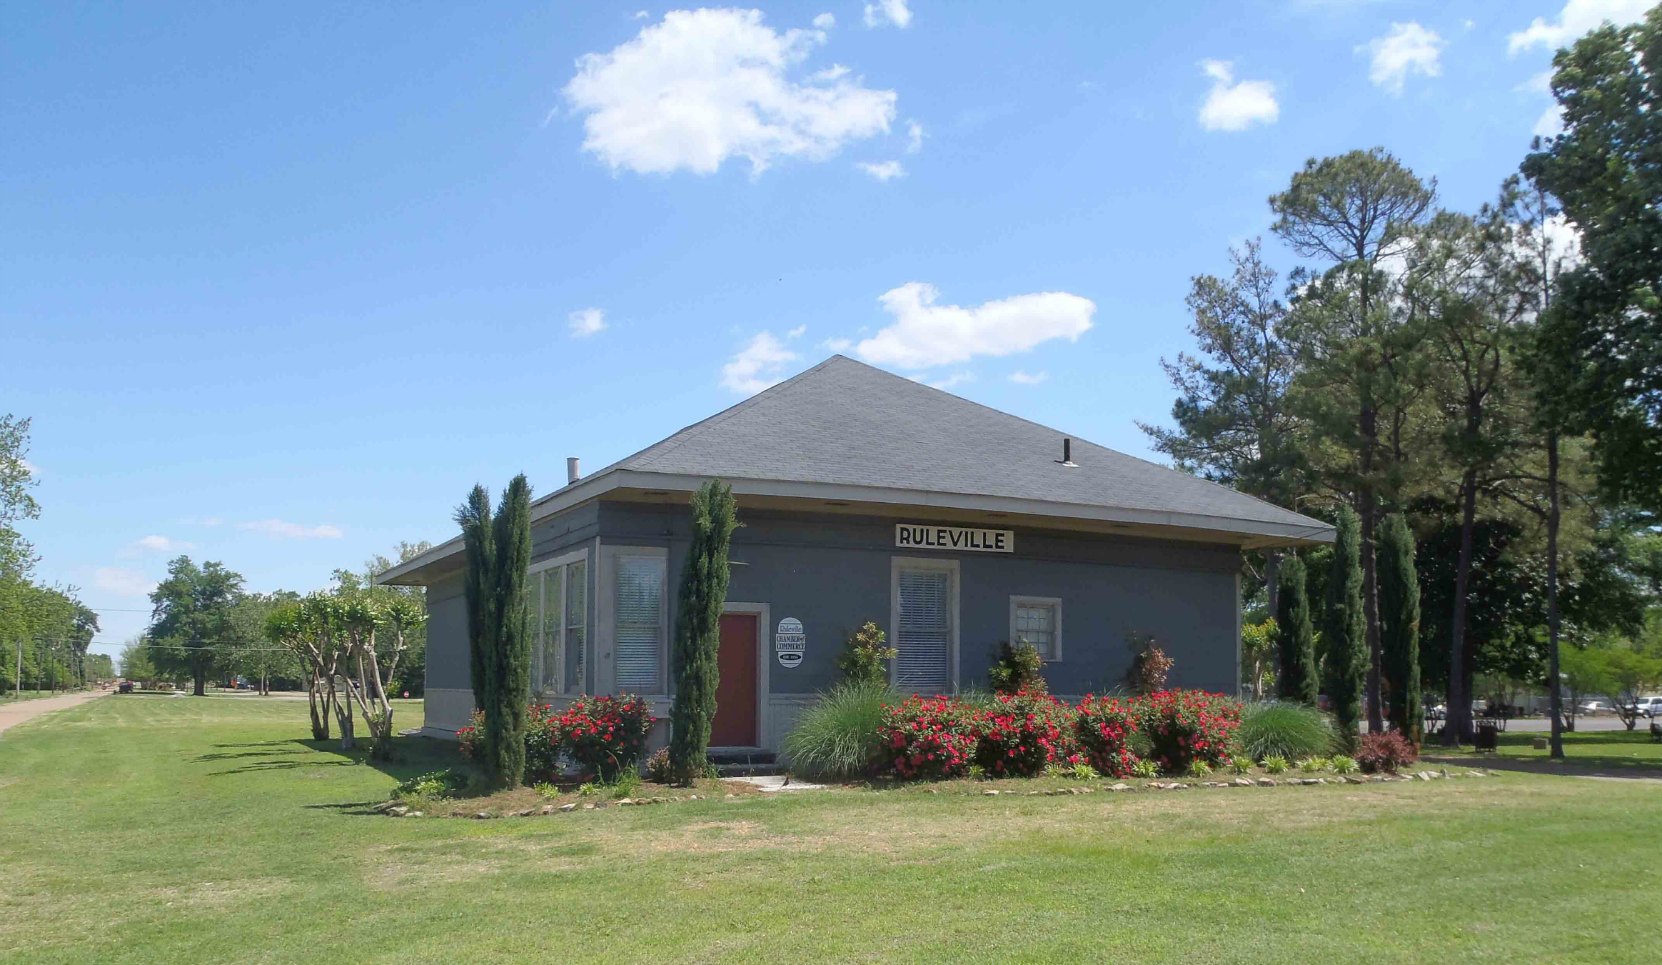 The former Ruleville Rail Depot, now the Ruleville Chamber of Commerce.